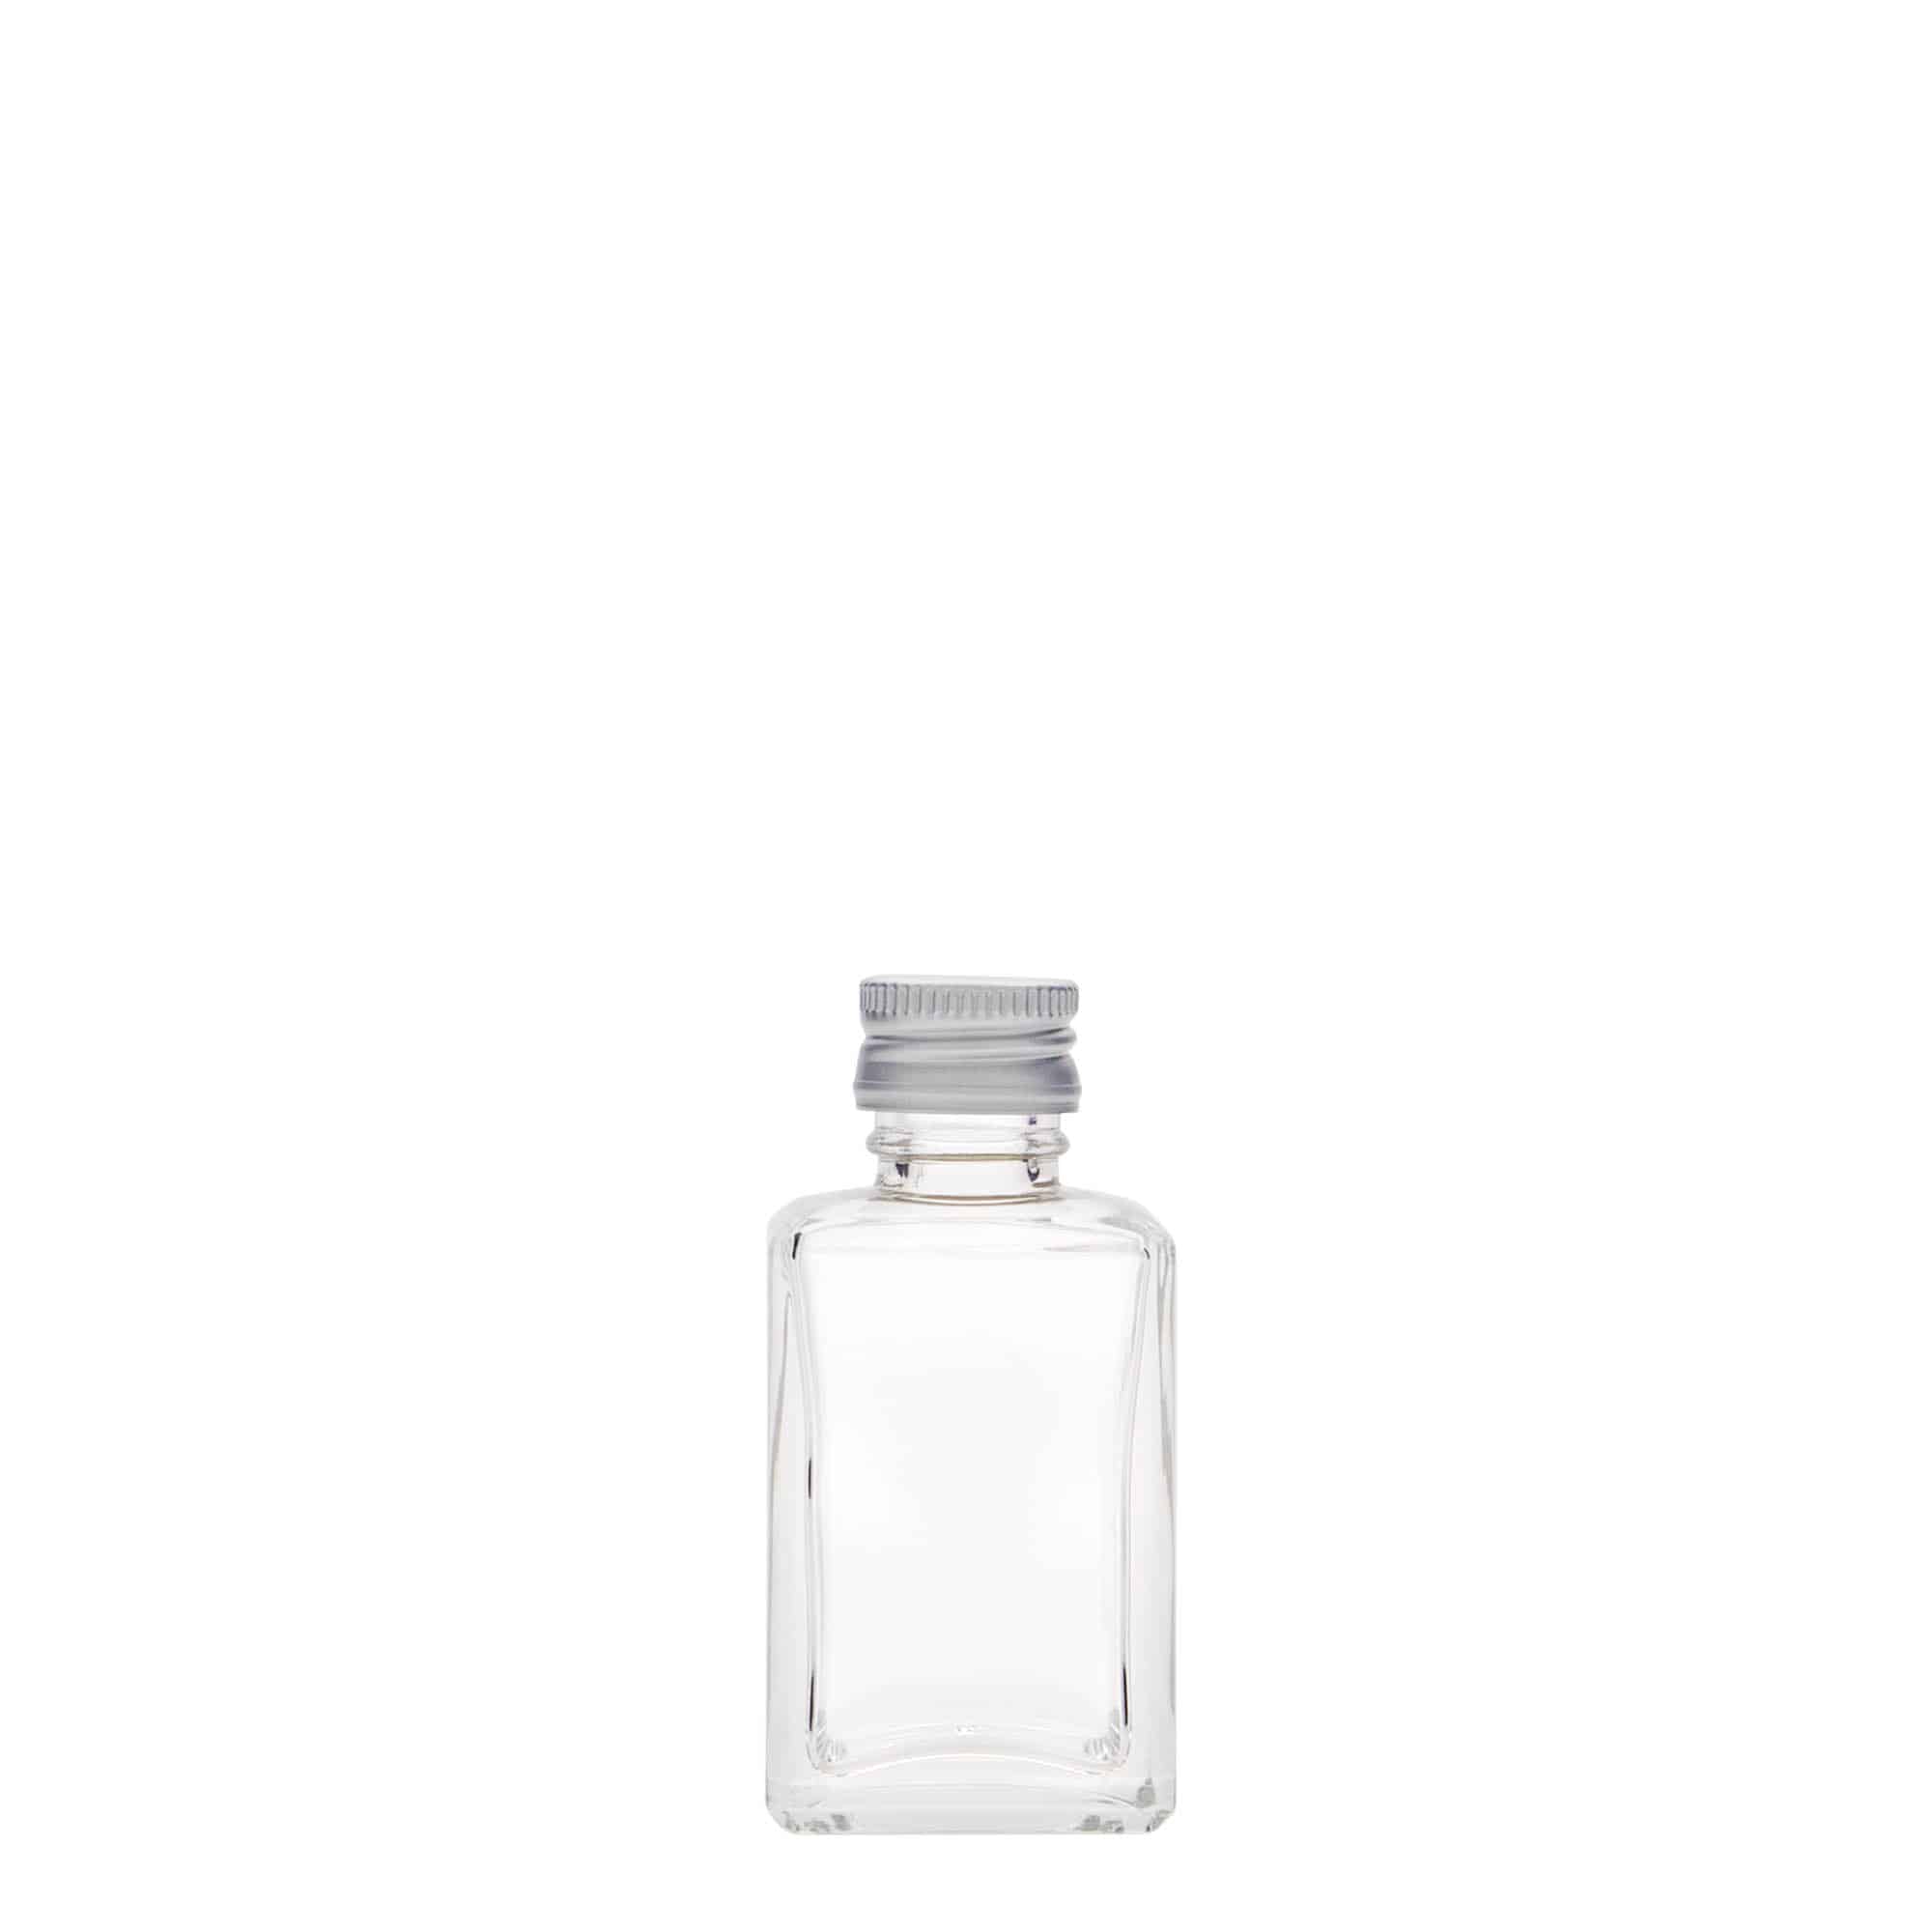 30 ml glass bottle 'Tamme', square, closure: PP 18